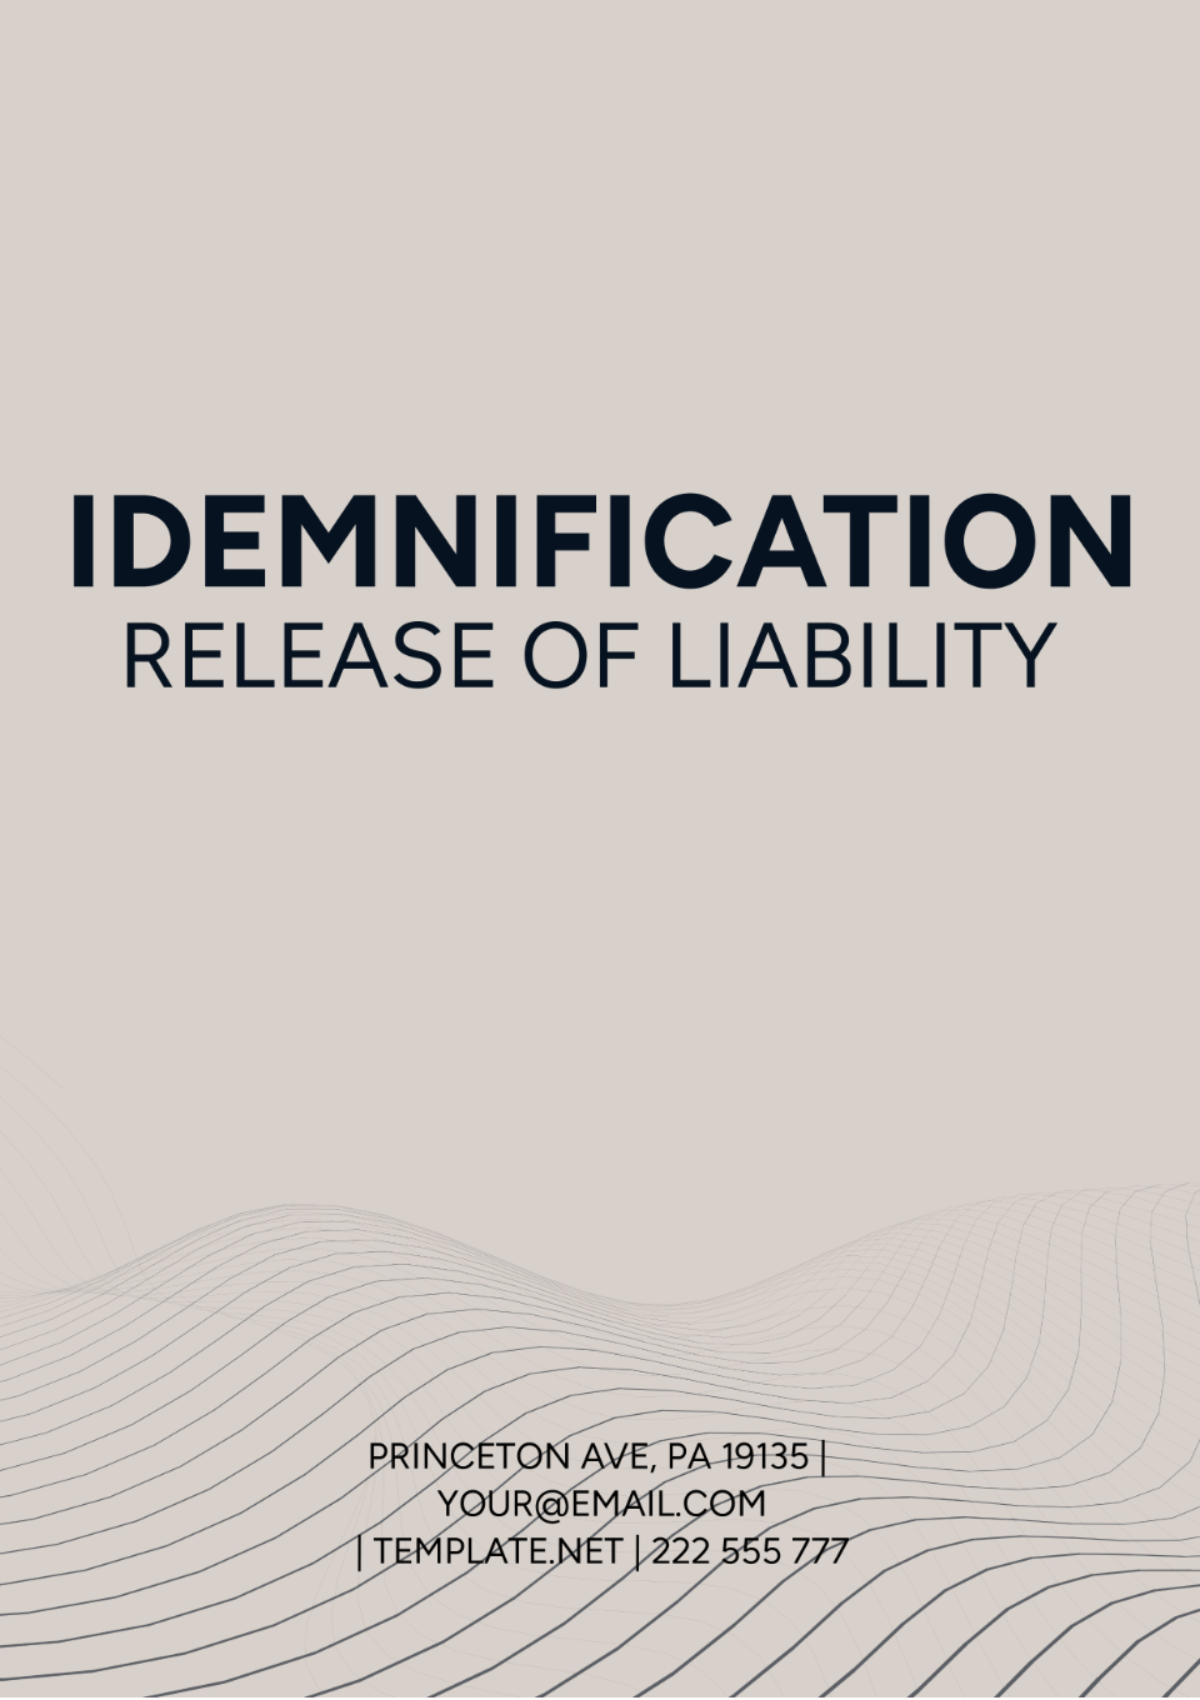 Free Indemnification Release Of Liability Template